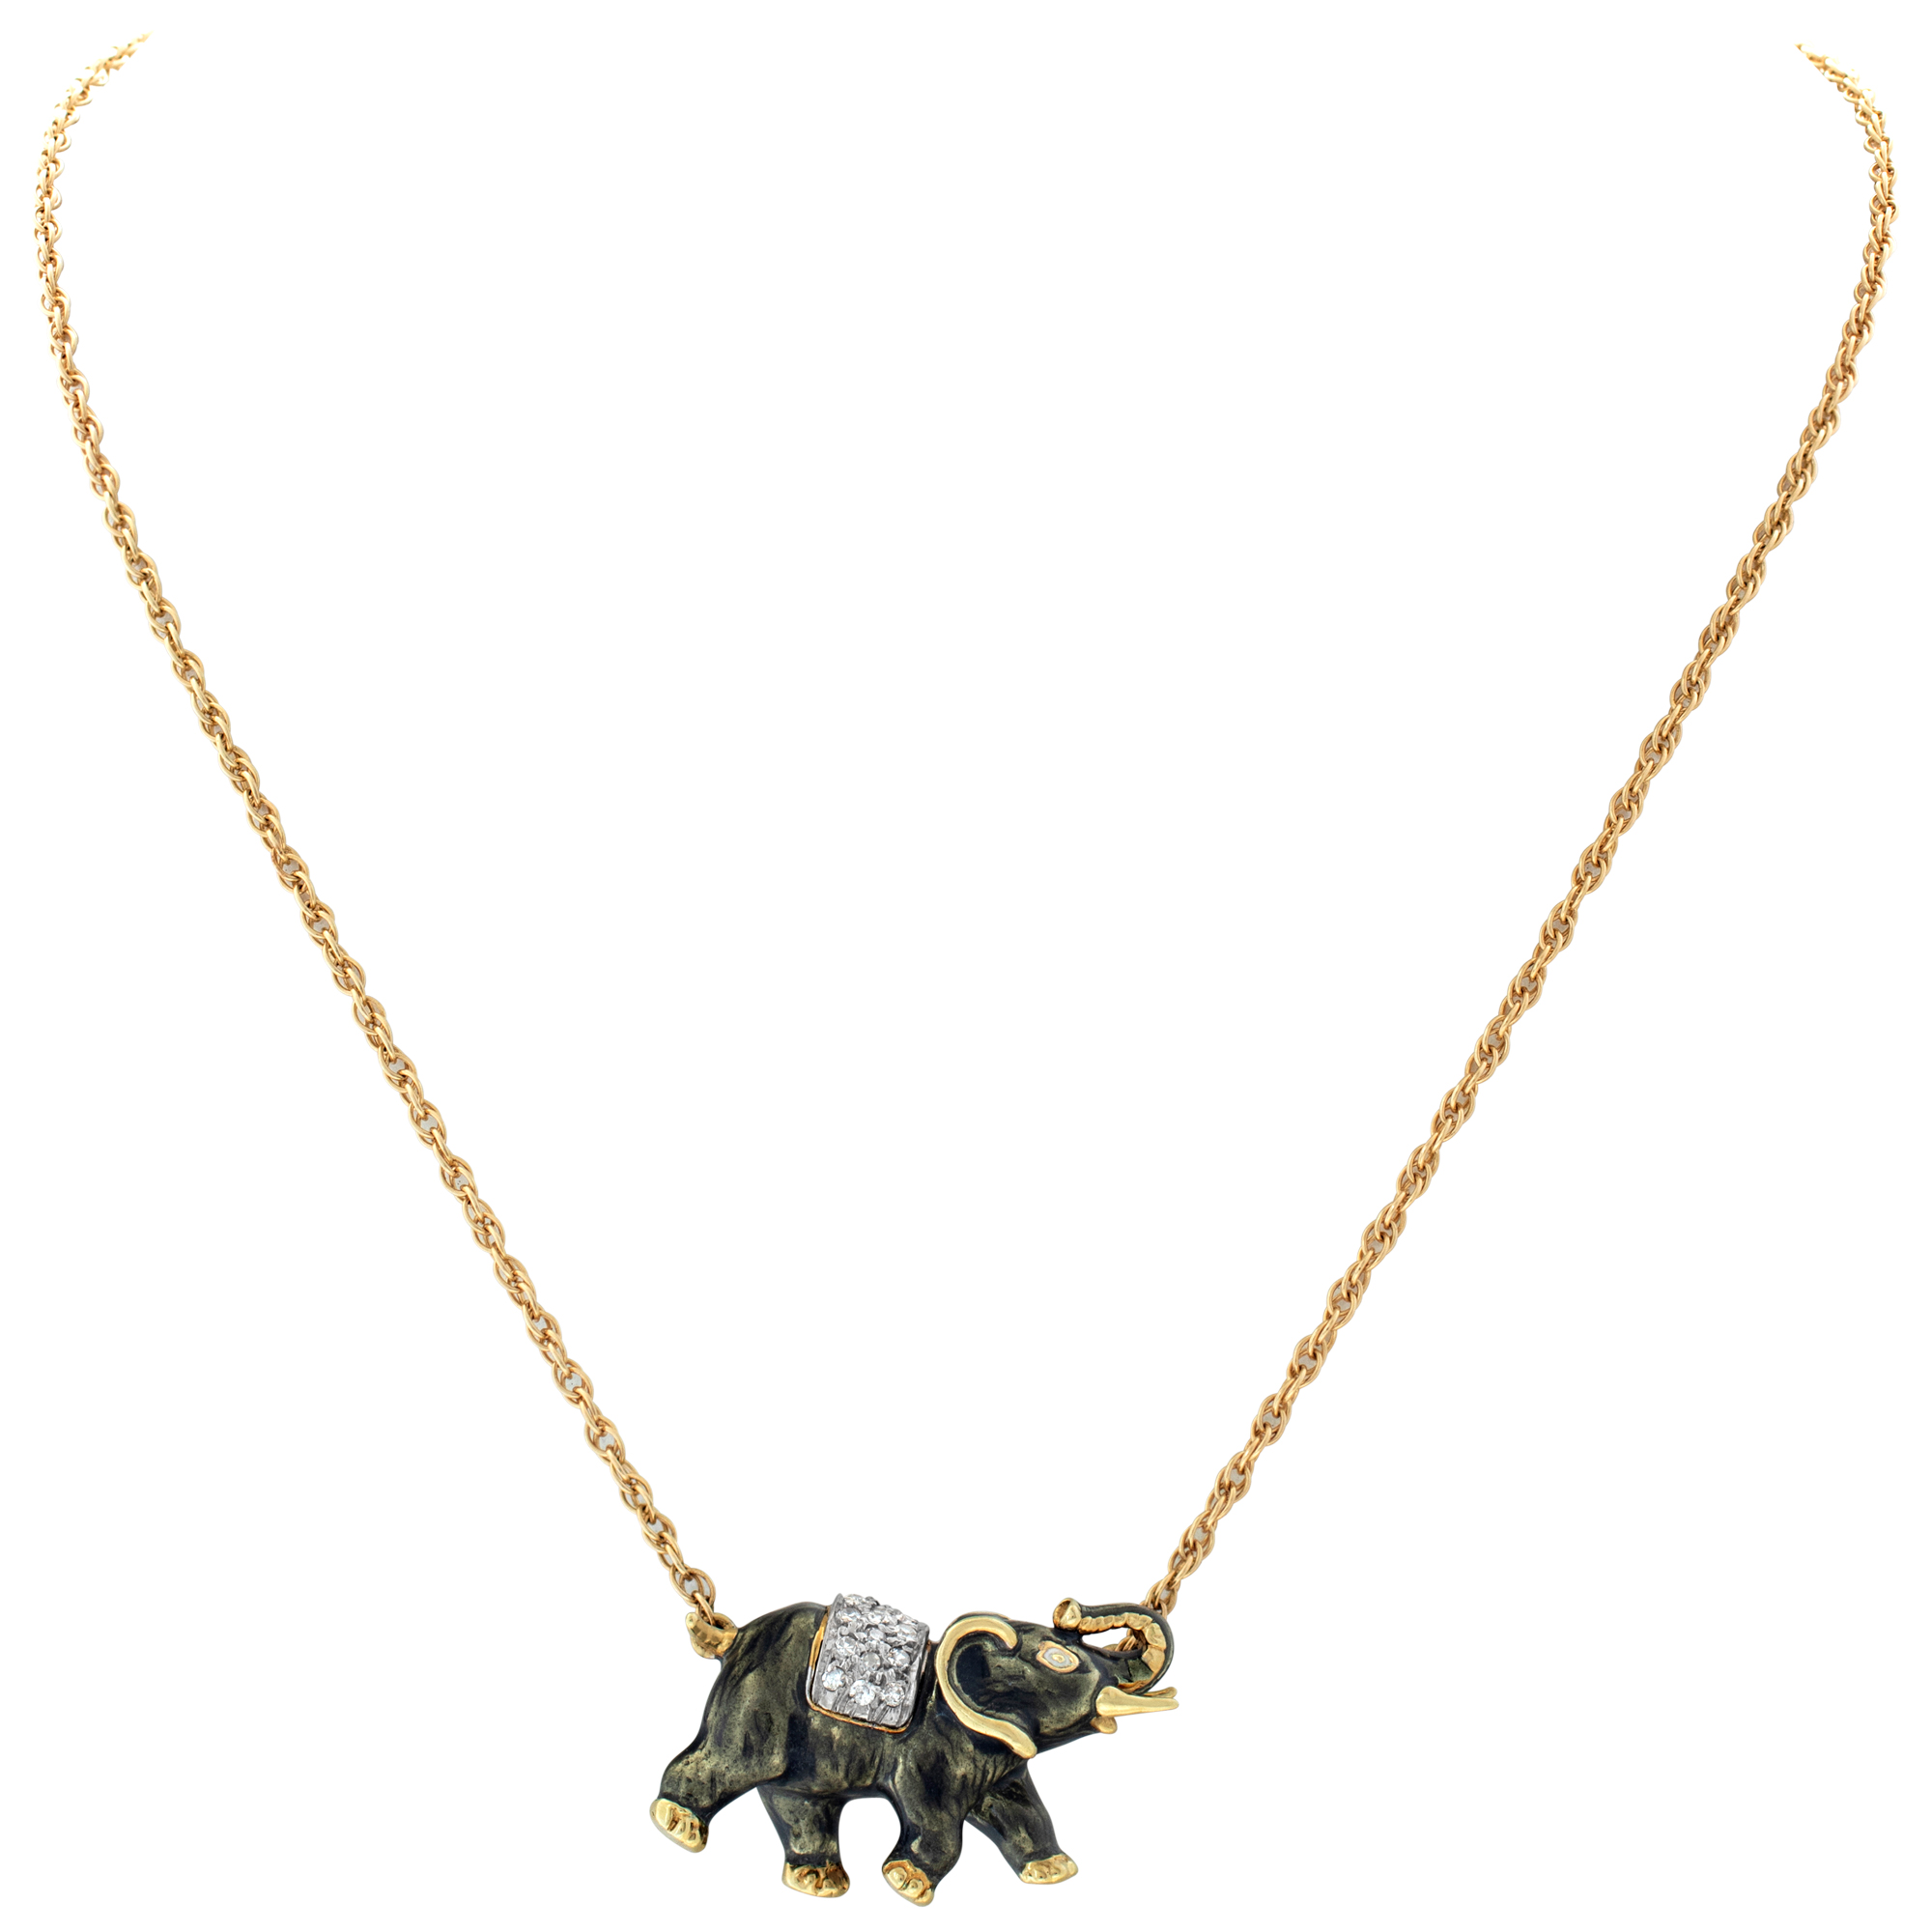 An Elephant necklace in 14k